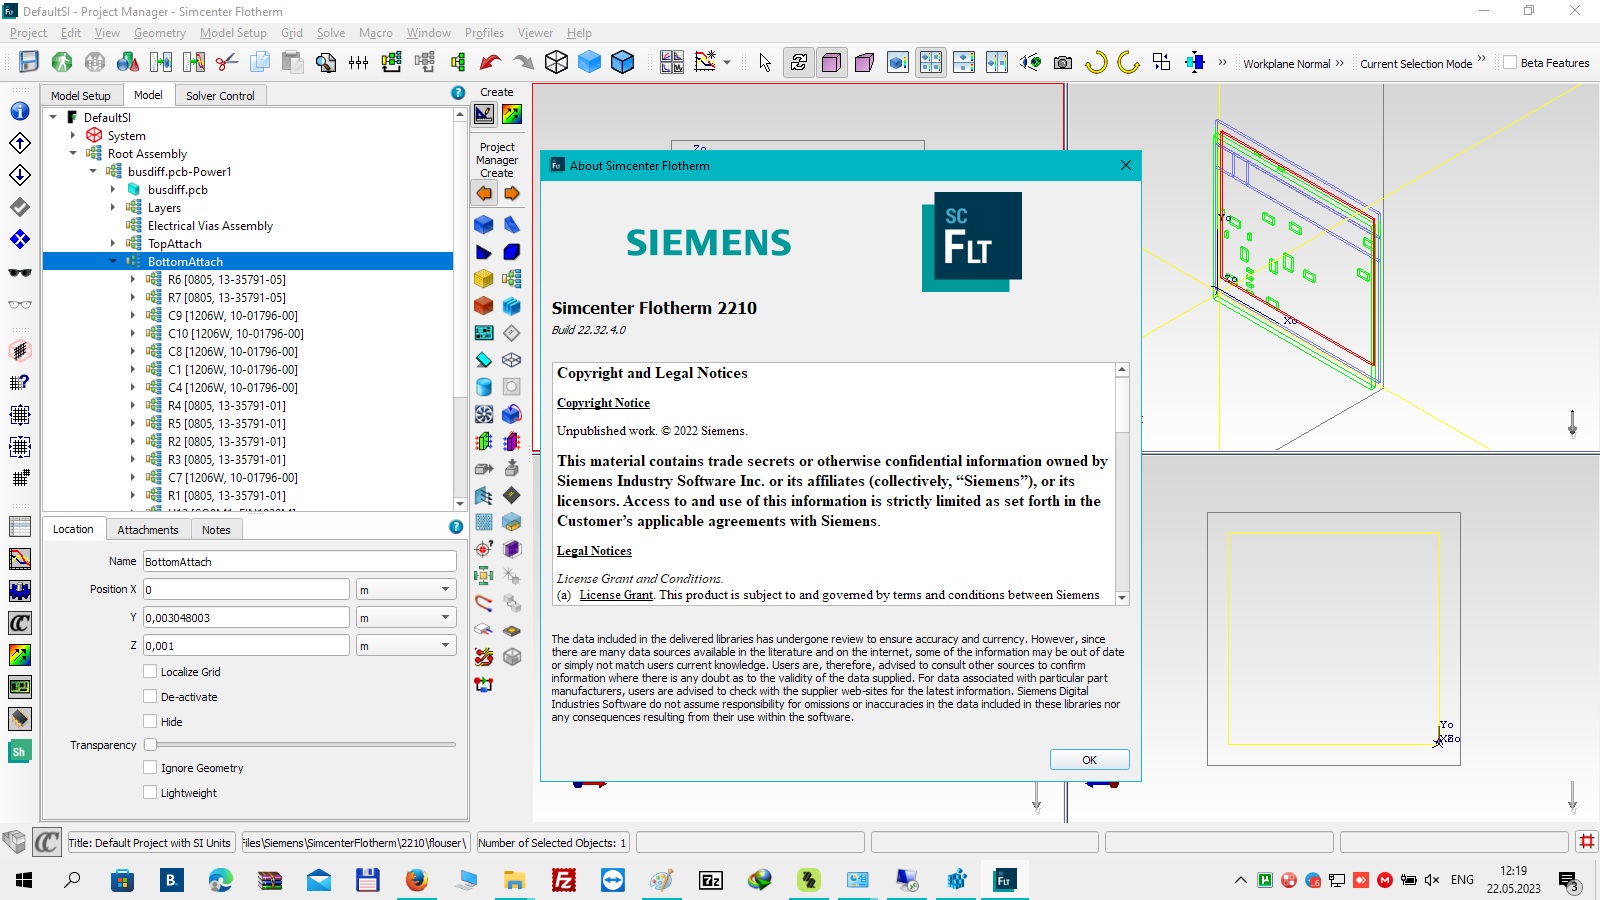 Working with Siemens Simcenter FloTHERM 2210 full license